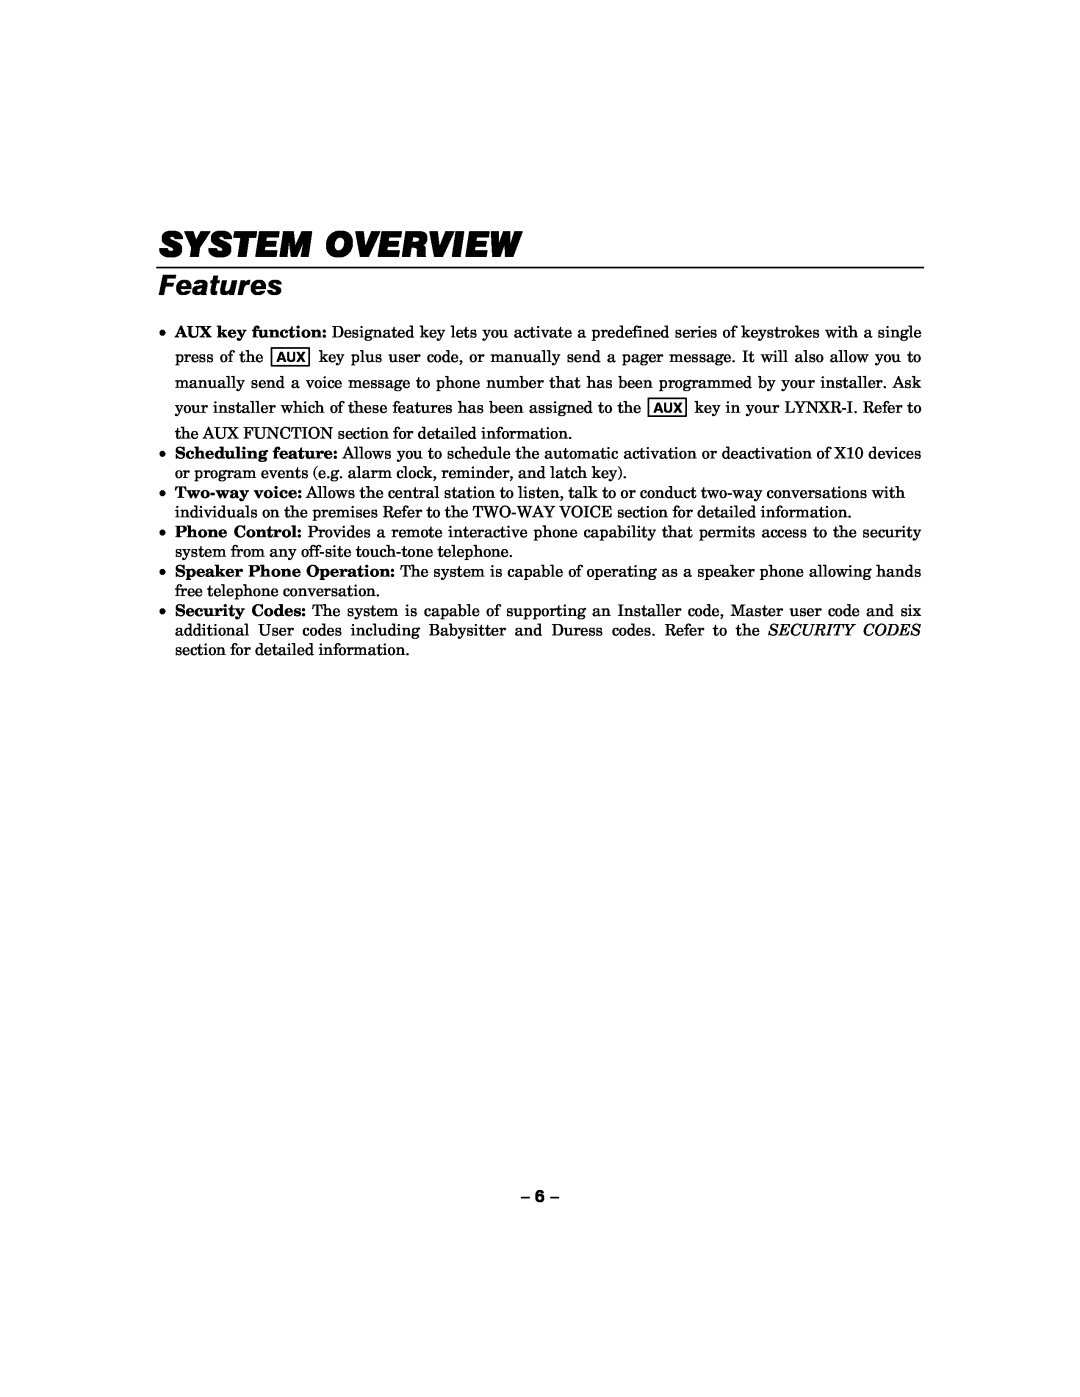 Honeywell LYNXR-I manual System Overview, Features 